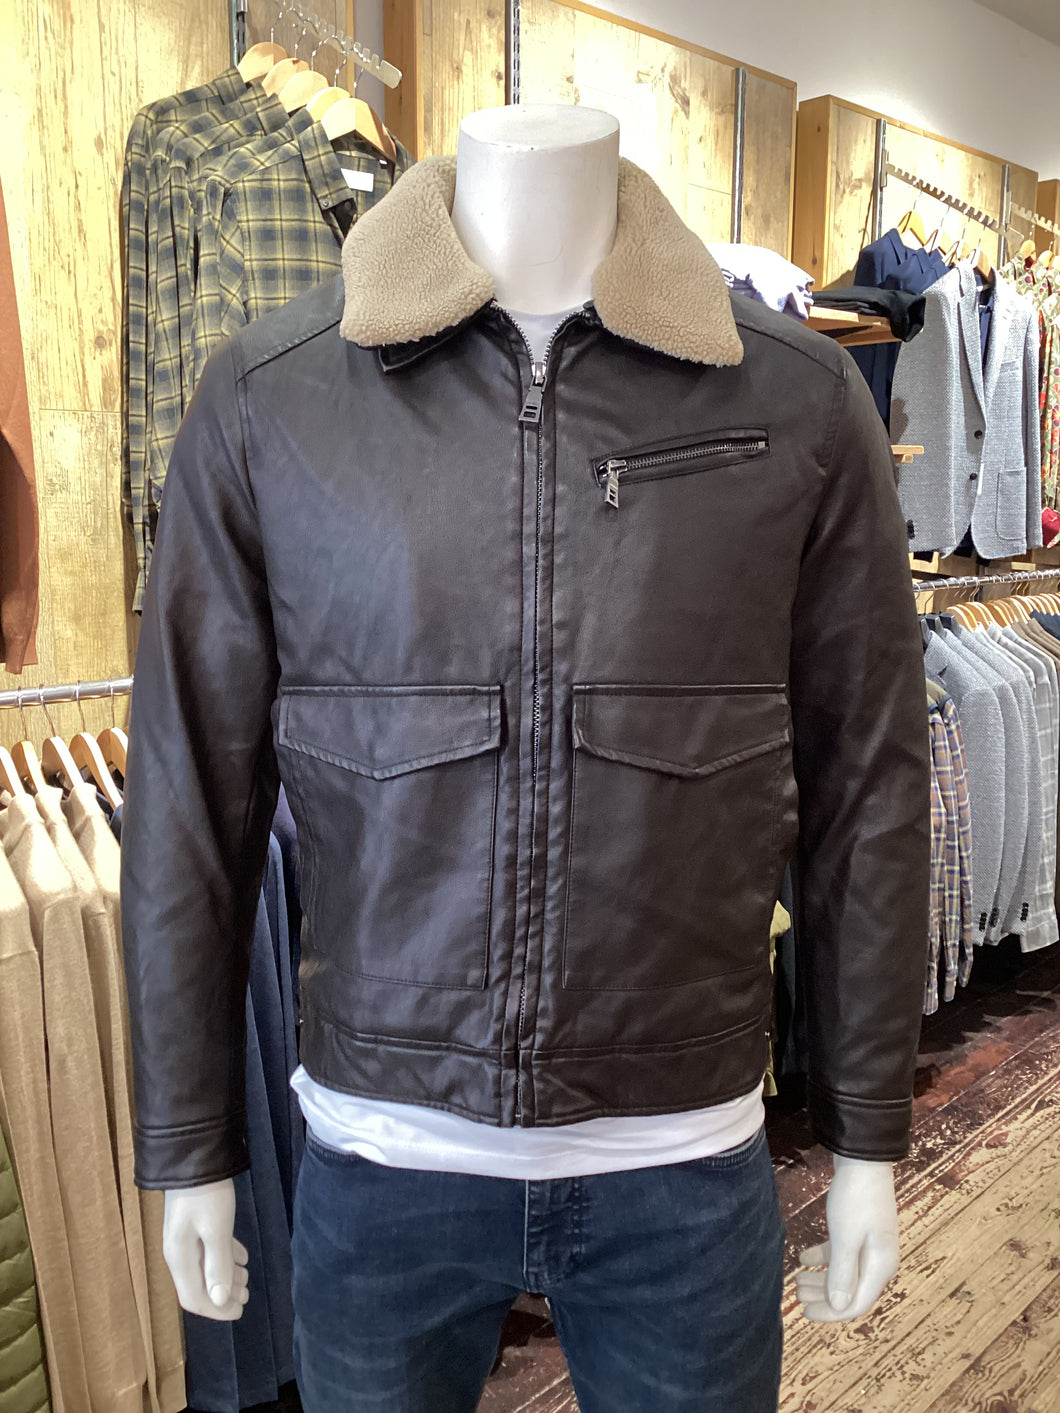 Sseinse - Pilot Jacket - Brown Faux Leather (with removable collar) 801